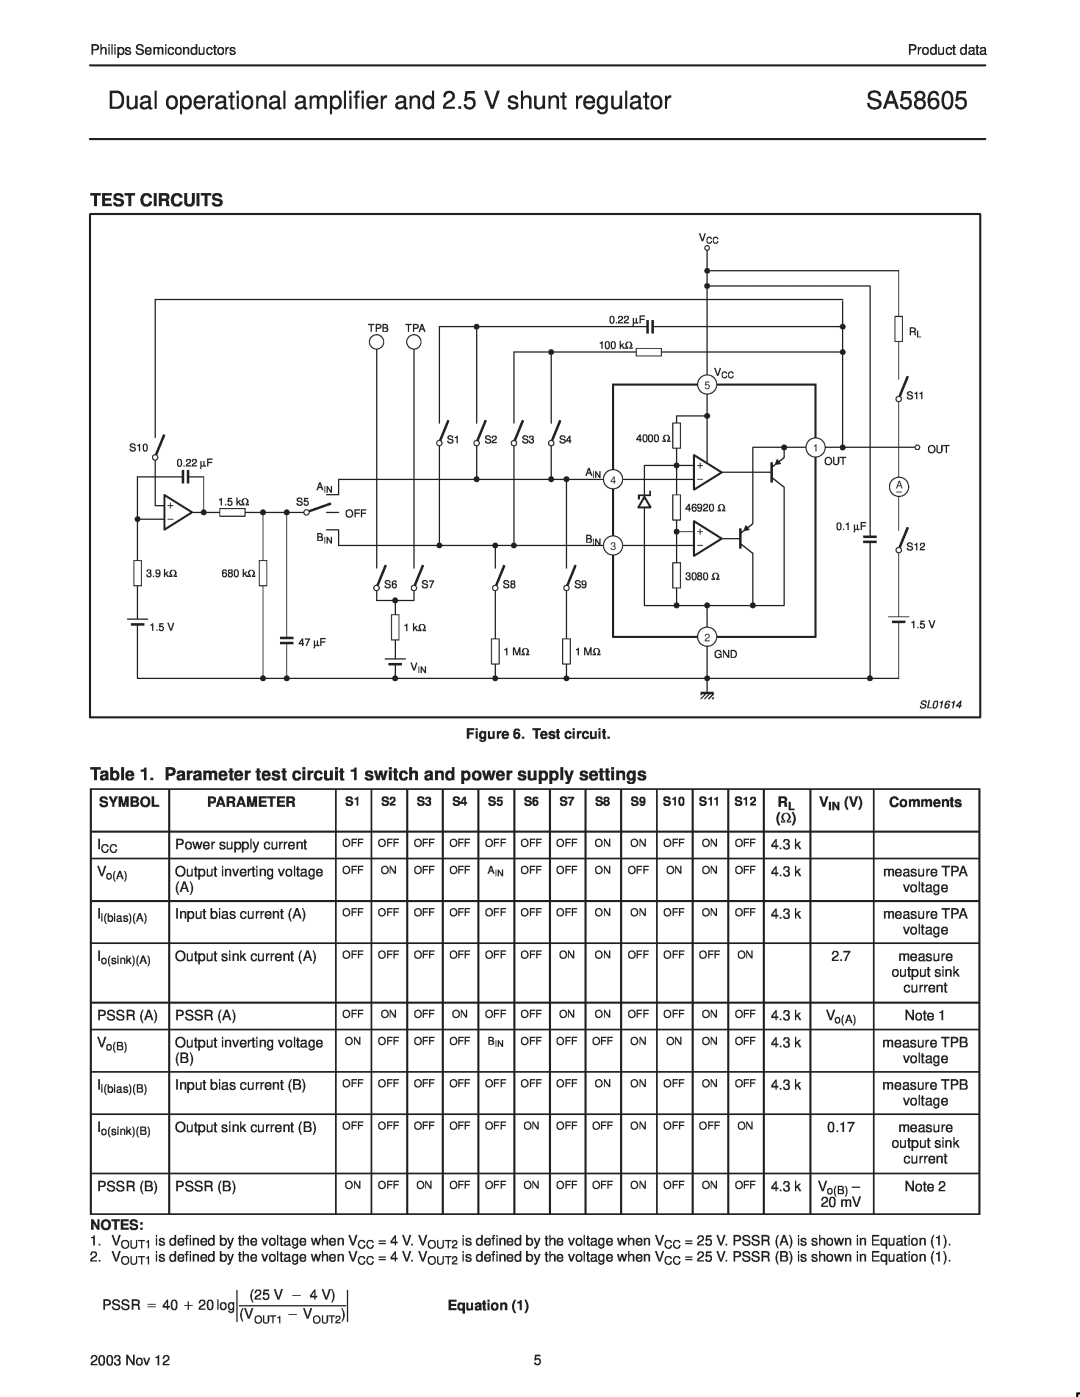 Philips SA58605 manual Test Circuits, Test circuit, Symbol, Parameter, Comments 